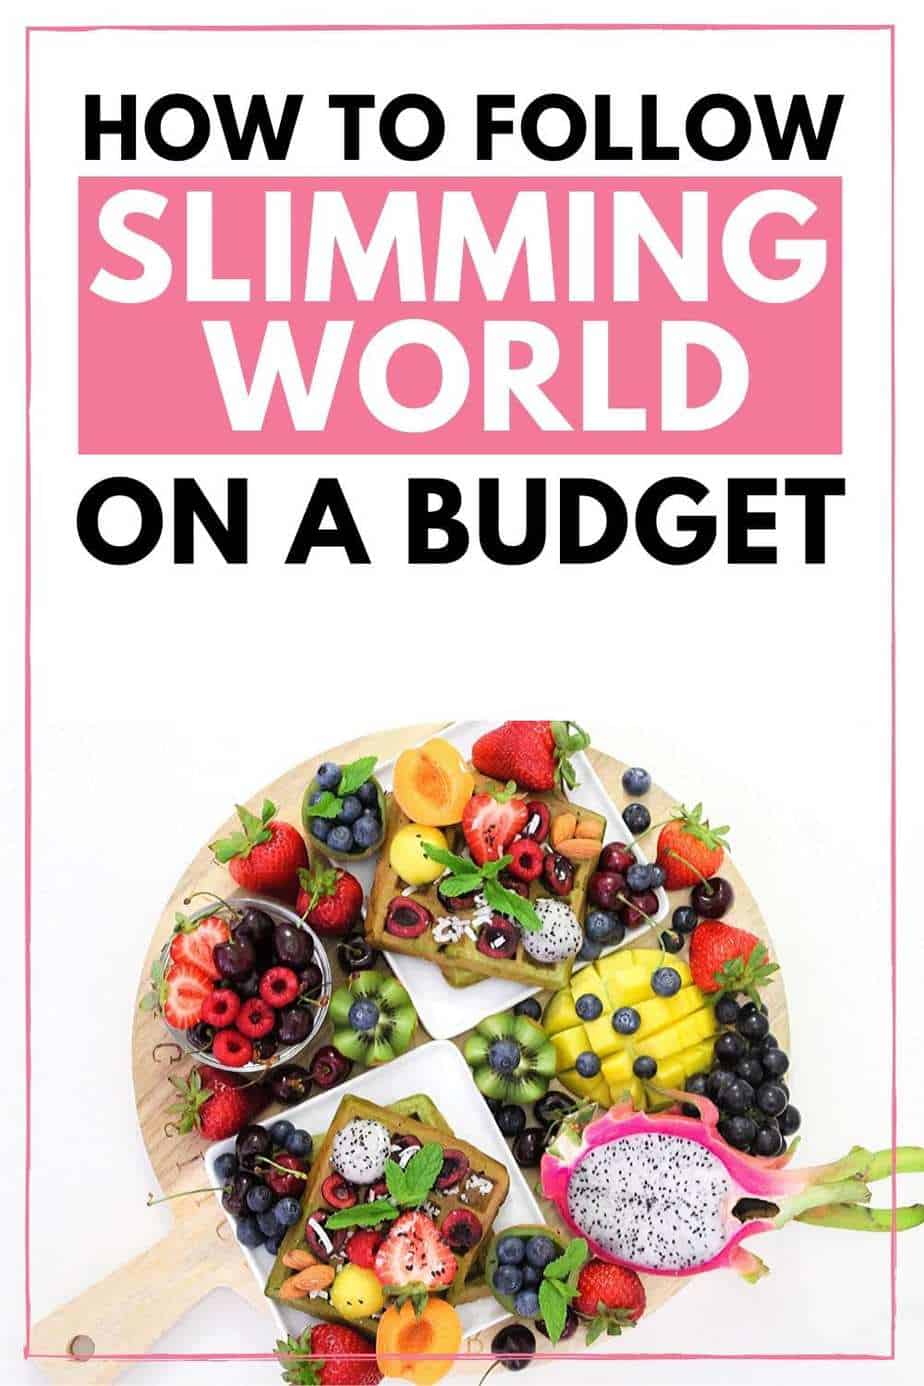 How To Follow Slimming World On A Budget